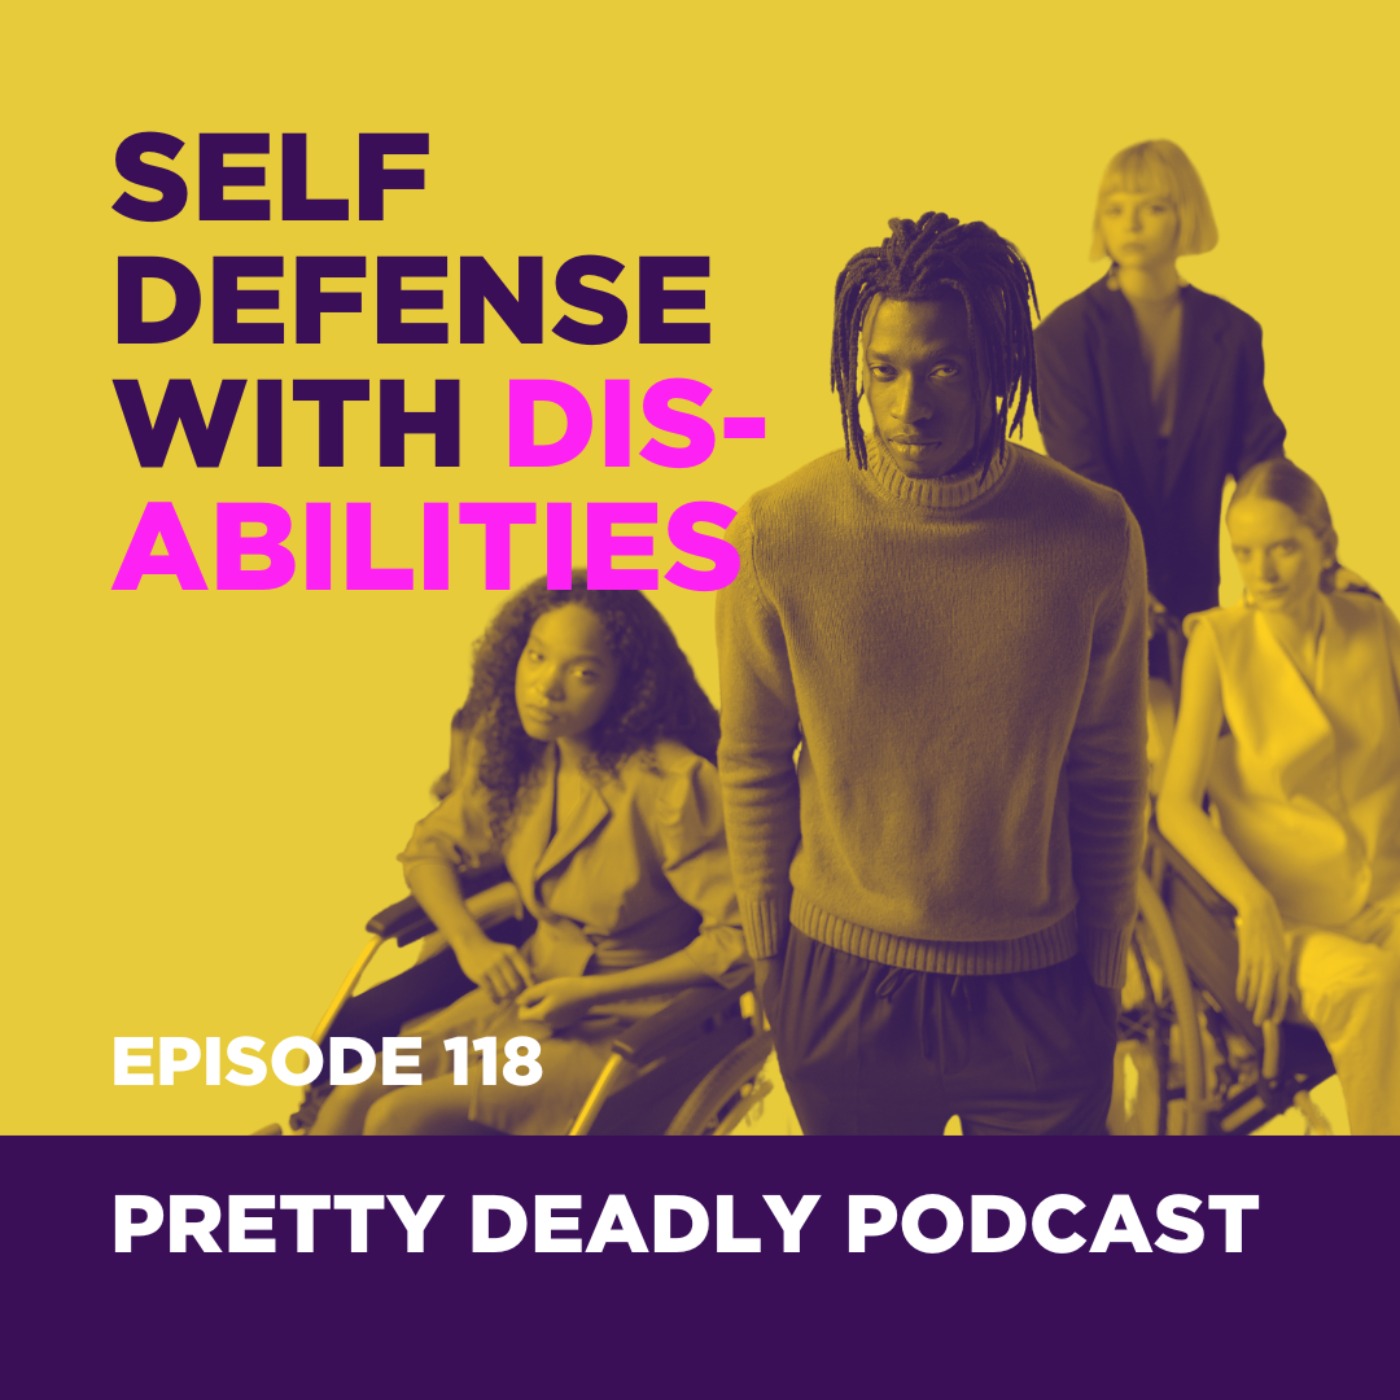 S7 Episode 118: Self Defense for People with Disabilities | Pretty Deadly Podcast